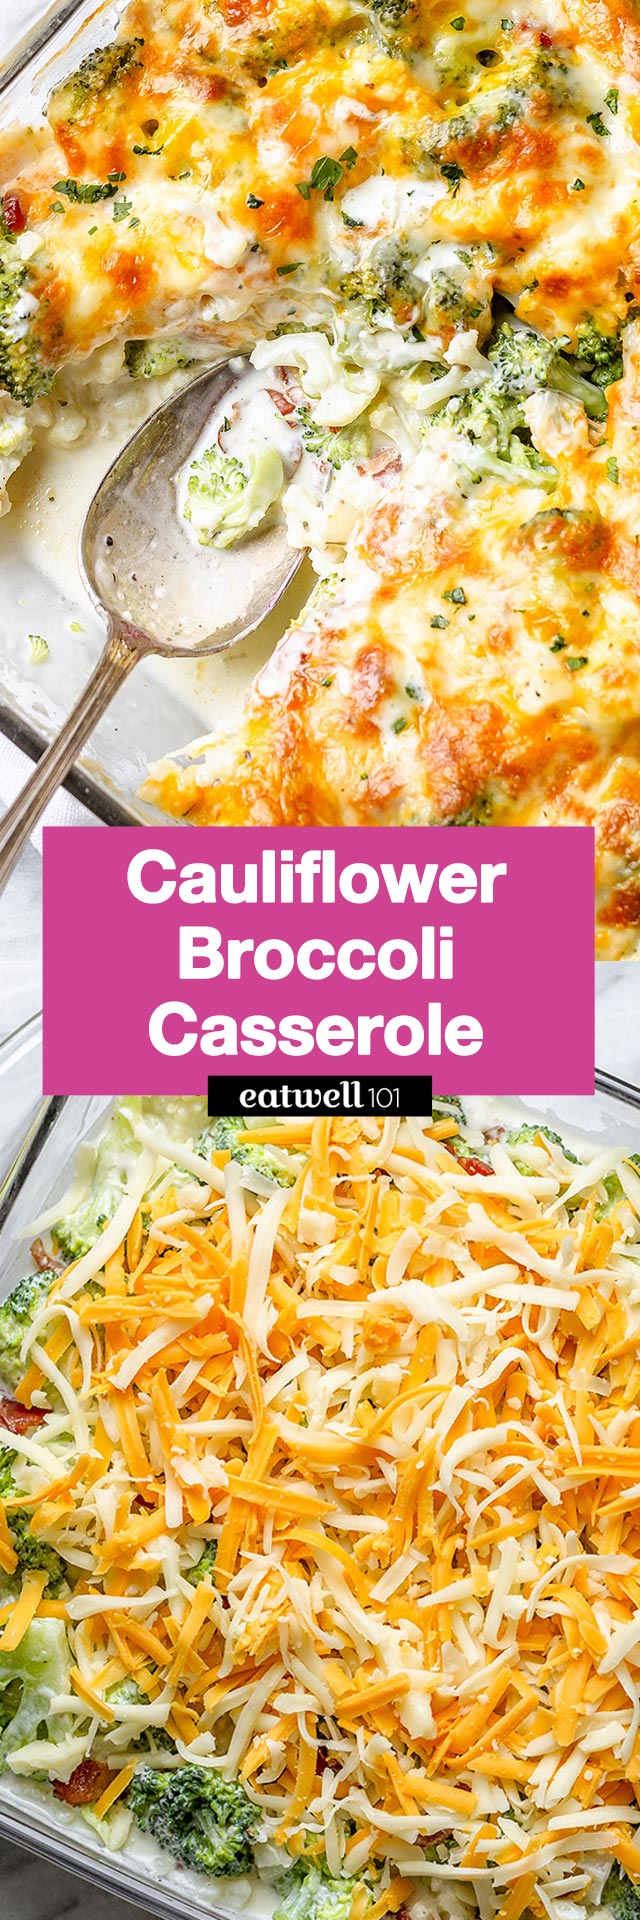 Loaded Cauliflower Broccoli Casserole - #casserole #broccoli #cauliflower #recipe #eatwell101 - This loaded cauliflower broccoli casserole with bacon is an incredible keto/low-carb recipe that's ready in 30mn and tastes incredible.